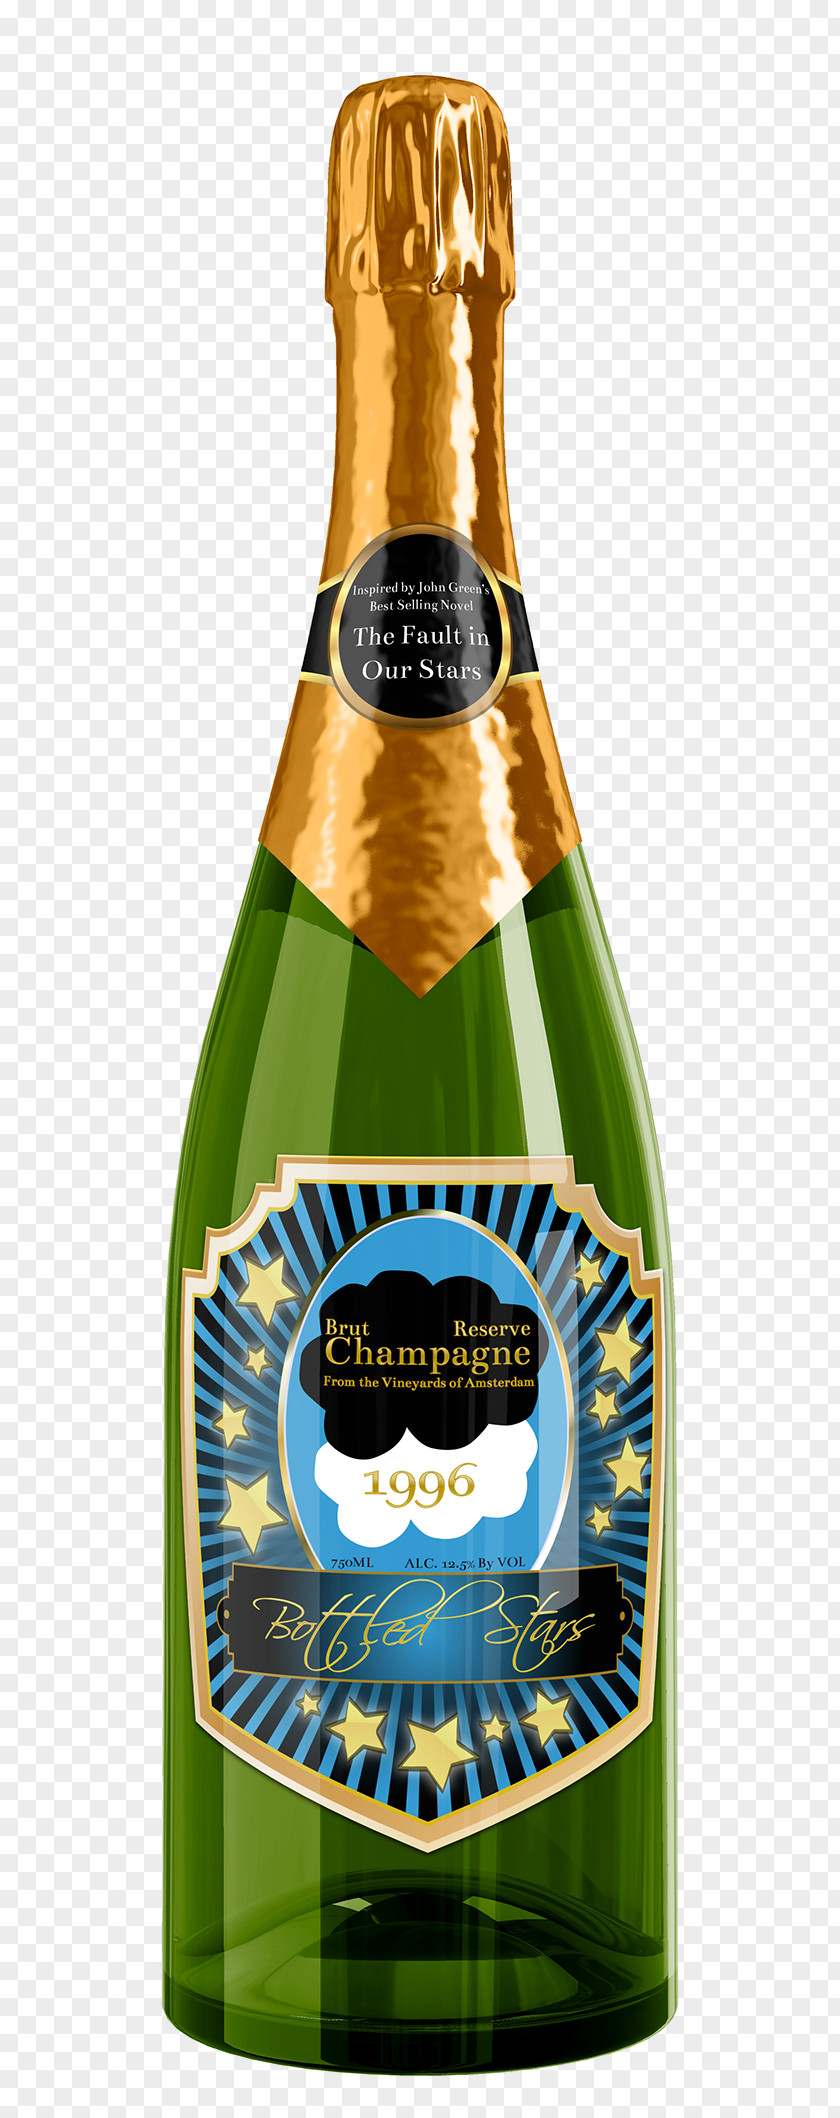 Champagne Beer Bottle Wine The Fault In Our Stars PNG